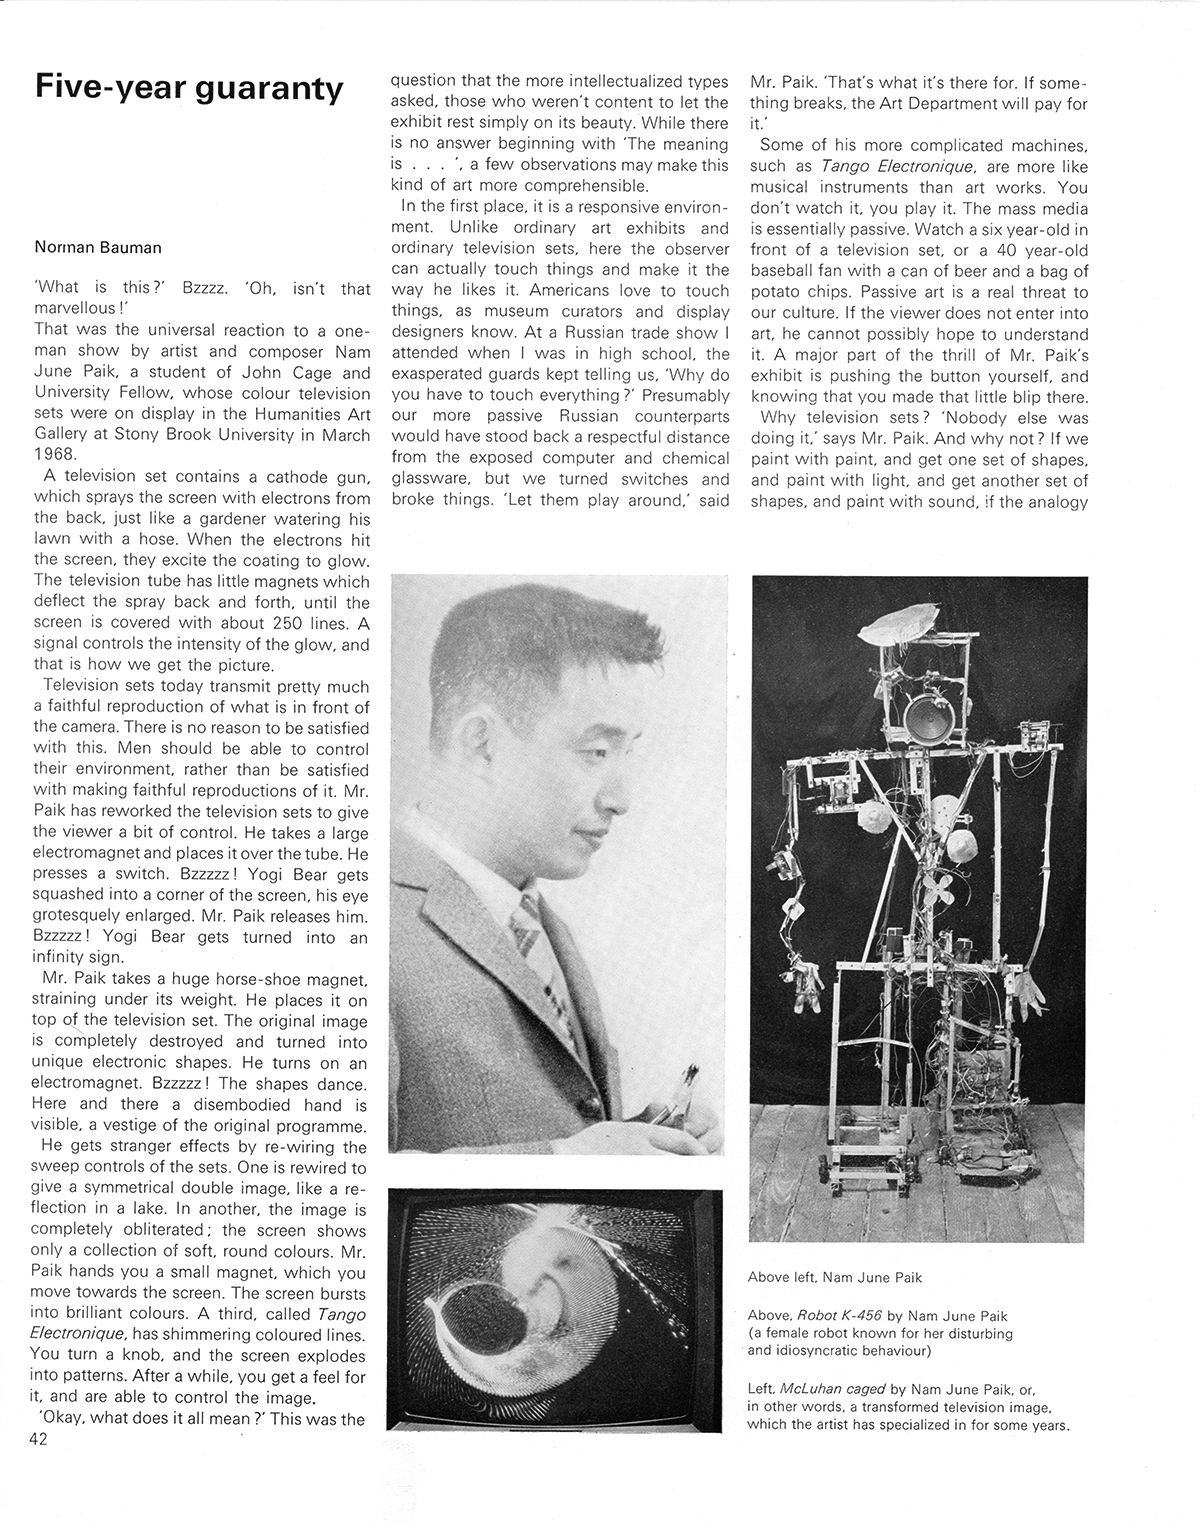 Five-year guaranty (featuring Nam June Paik) by Norman Bauman. Cybernetic Serendipity: The Computer and the Arts, Studio International Special Issue, 1968, page 42.